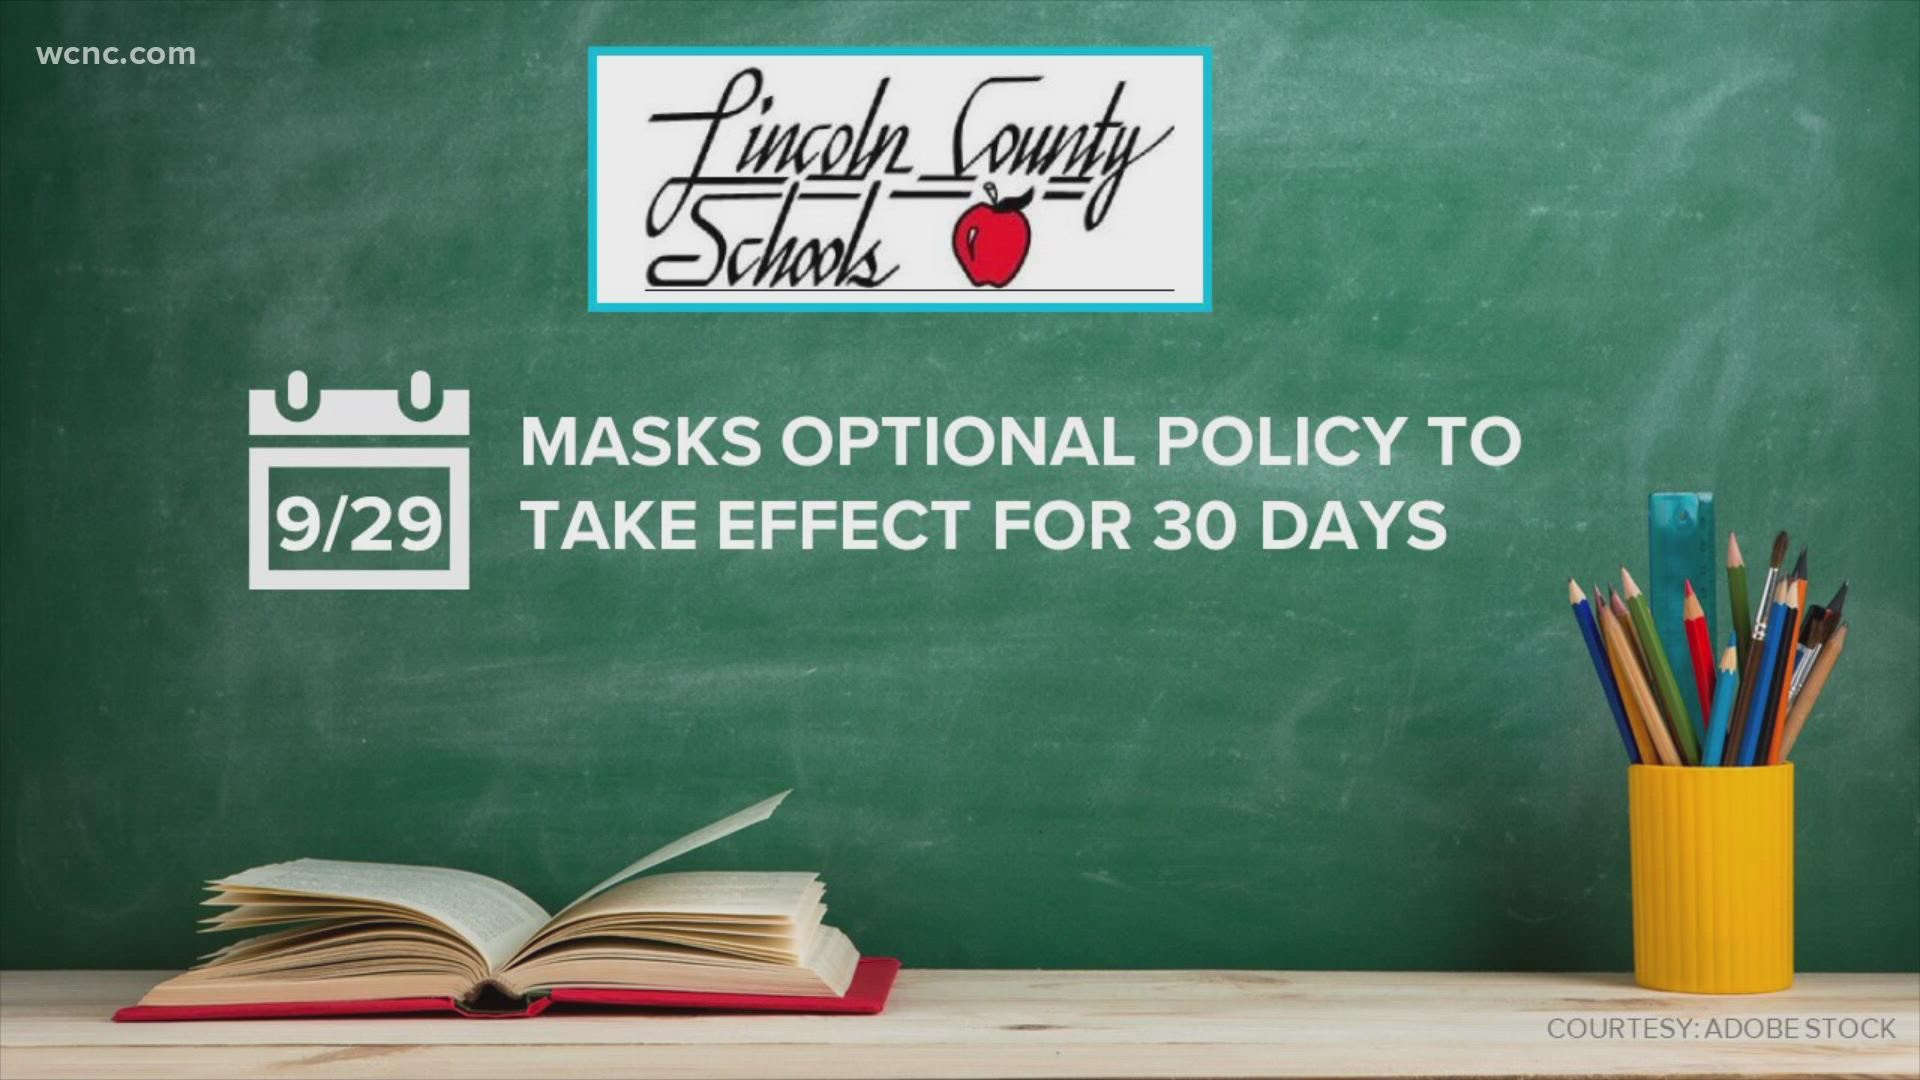 The optional mask policy will start on Sept. 29 and will last for 30 days.